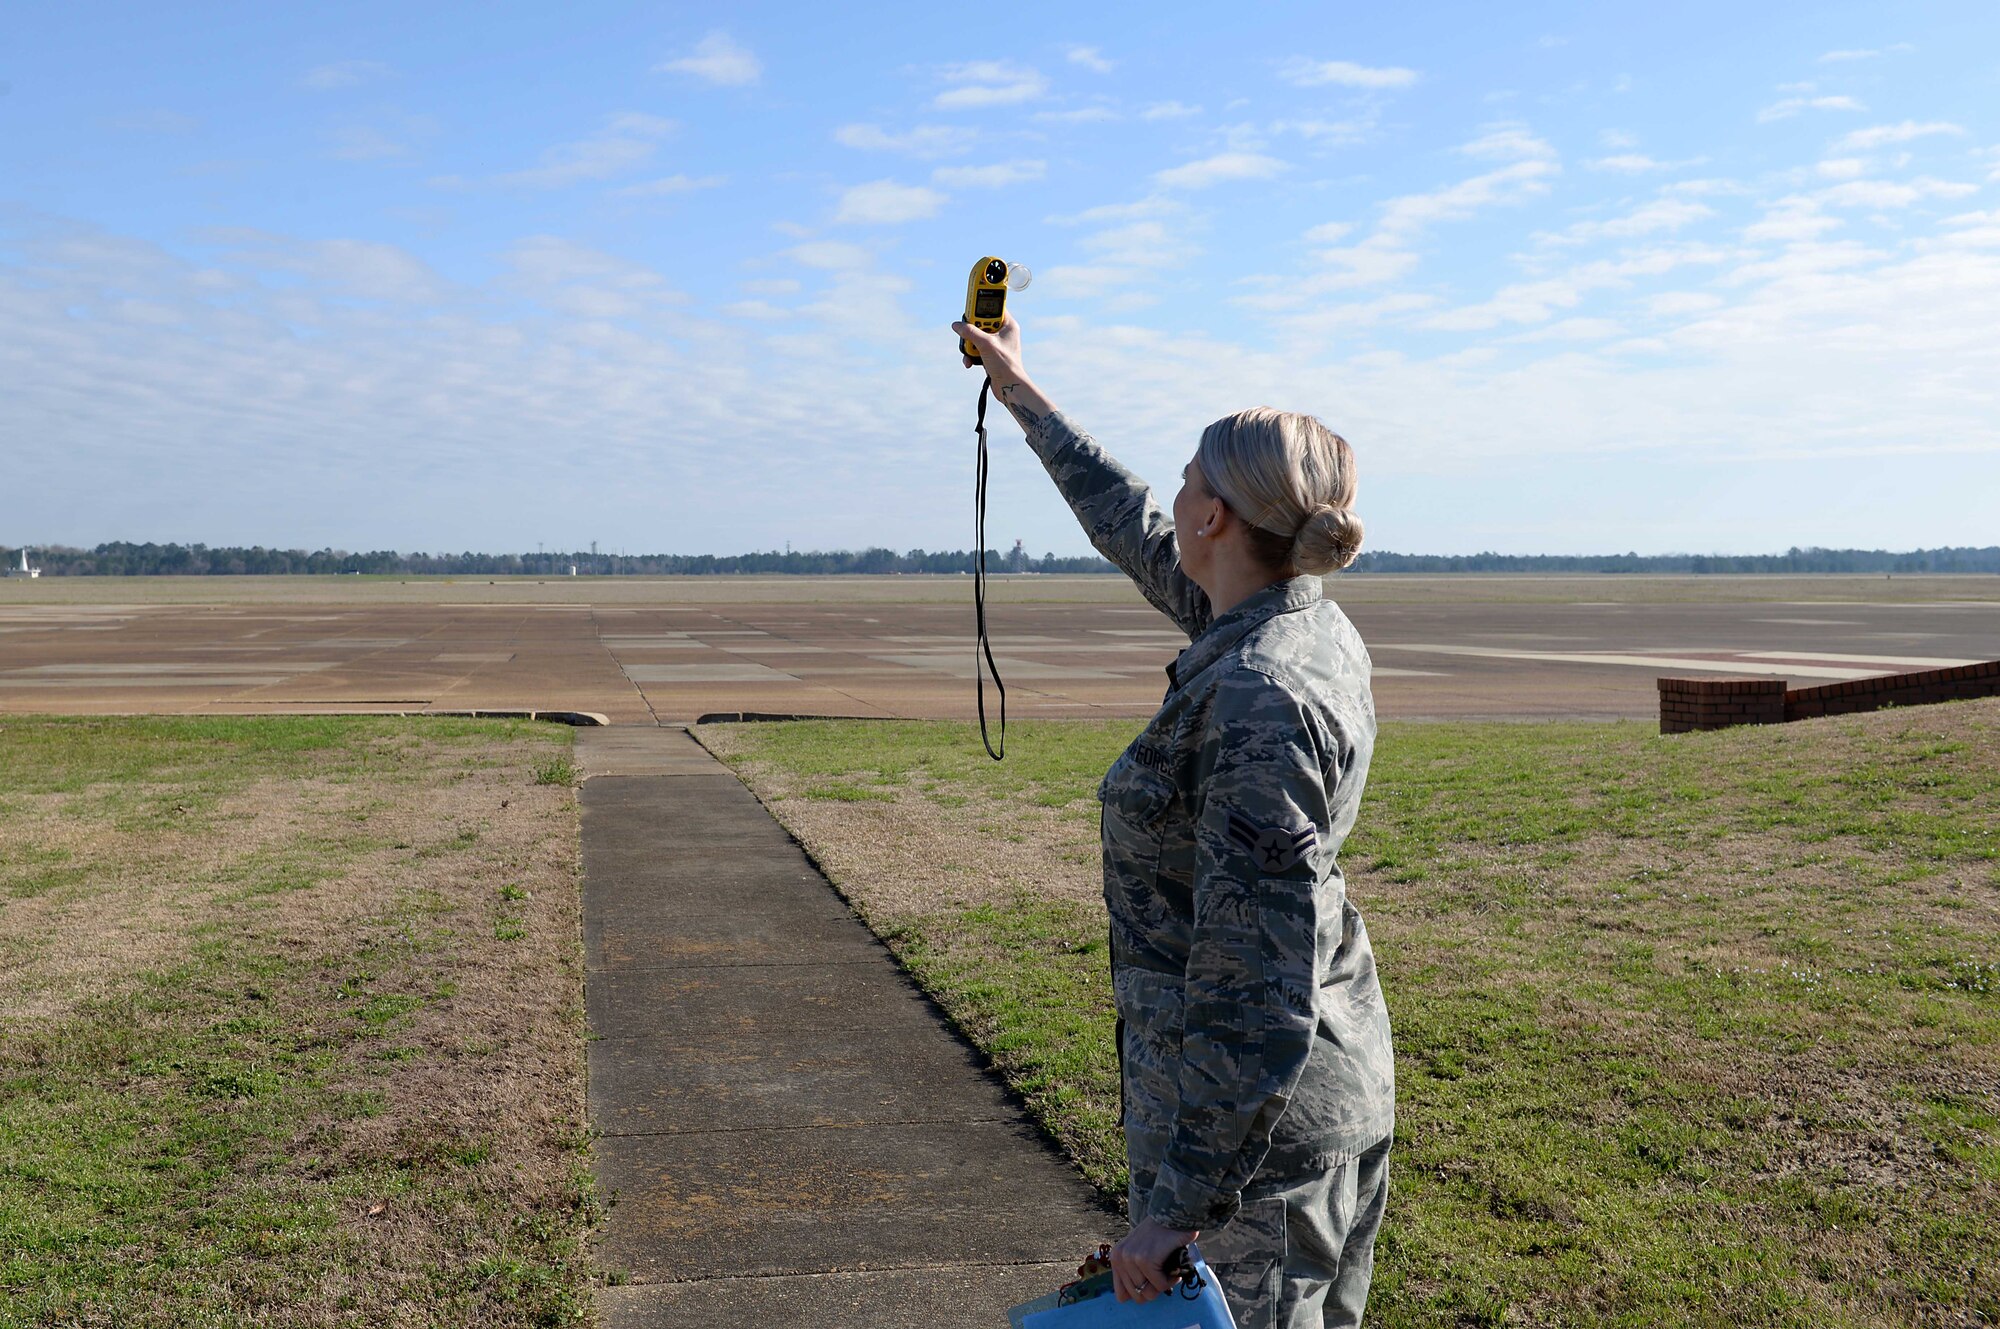 Airman 1st Class Lauren Rodgers, 14th Operations Support Squadron Weather Flight apprentice, gauges the wind with an anemometer Feb. 27, 2019, on Columbus Air Force Base, Mississippi. Anemometers are used to measure wind speed. (U.S. Air Force photo by Airman Hannah Bean)